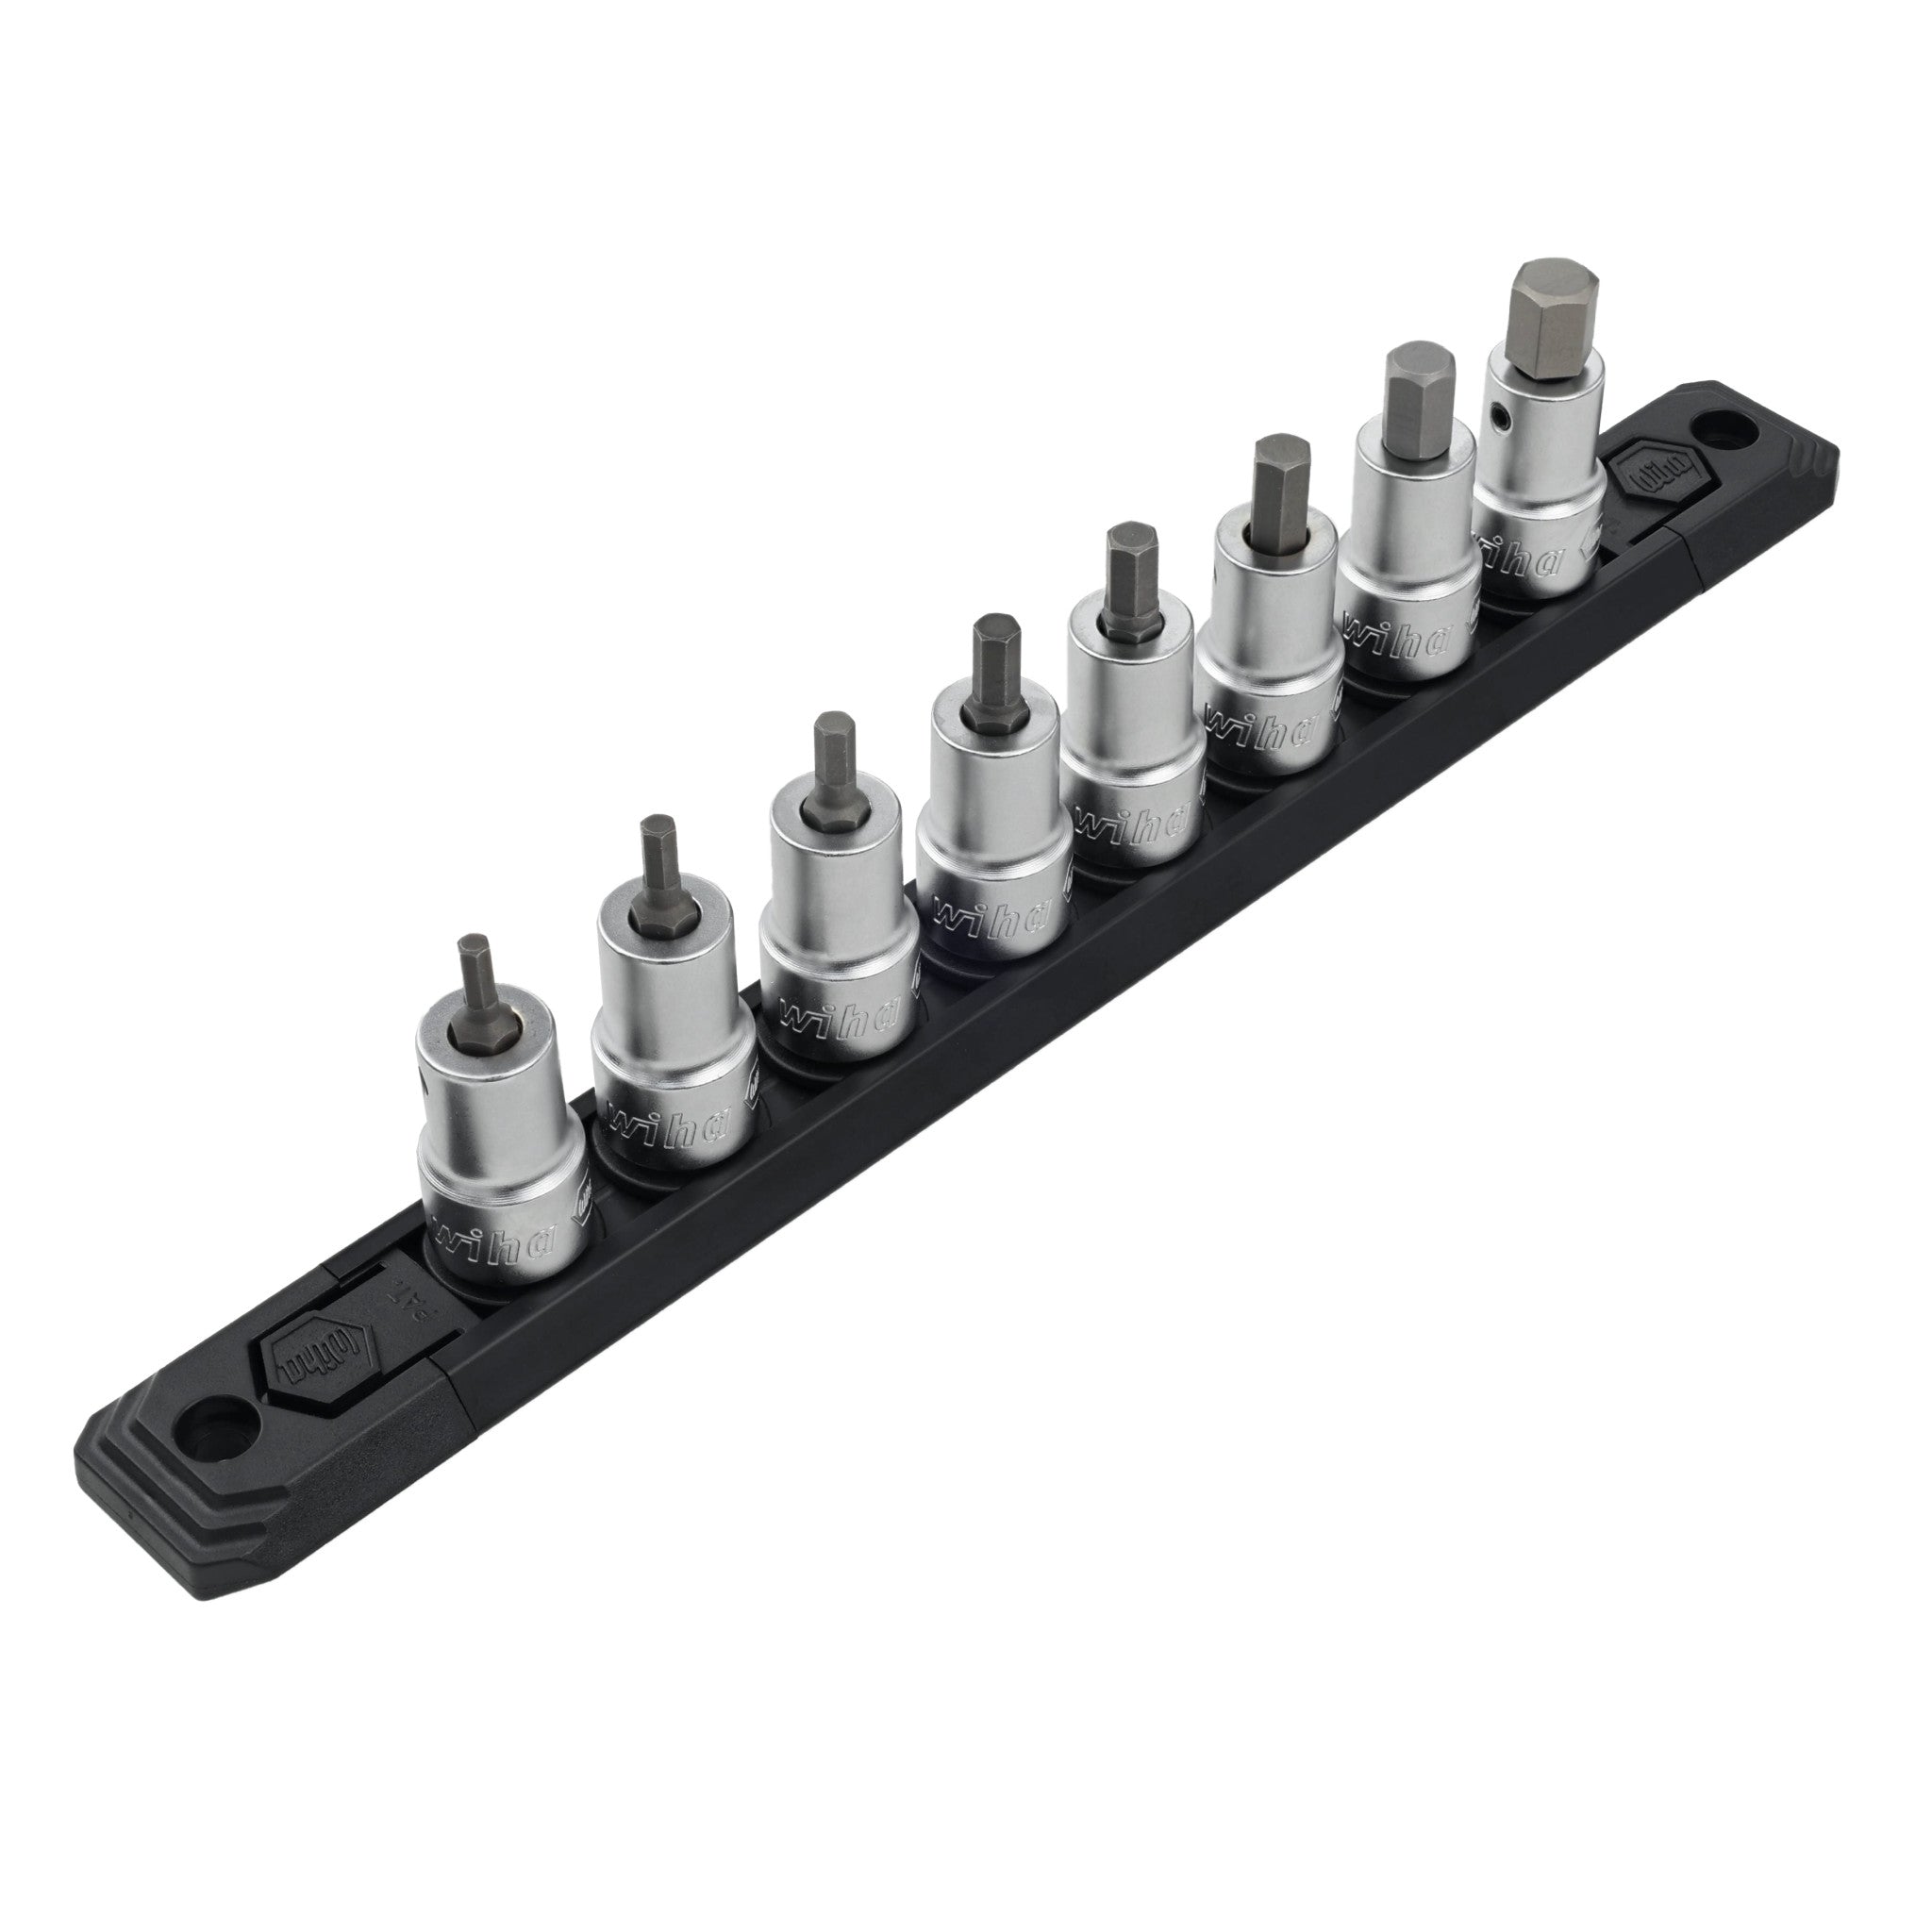 1/4 in. and 3/8 in. Drive Metric Professional Ball Hex Socket Set, 8 Piece